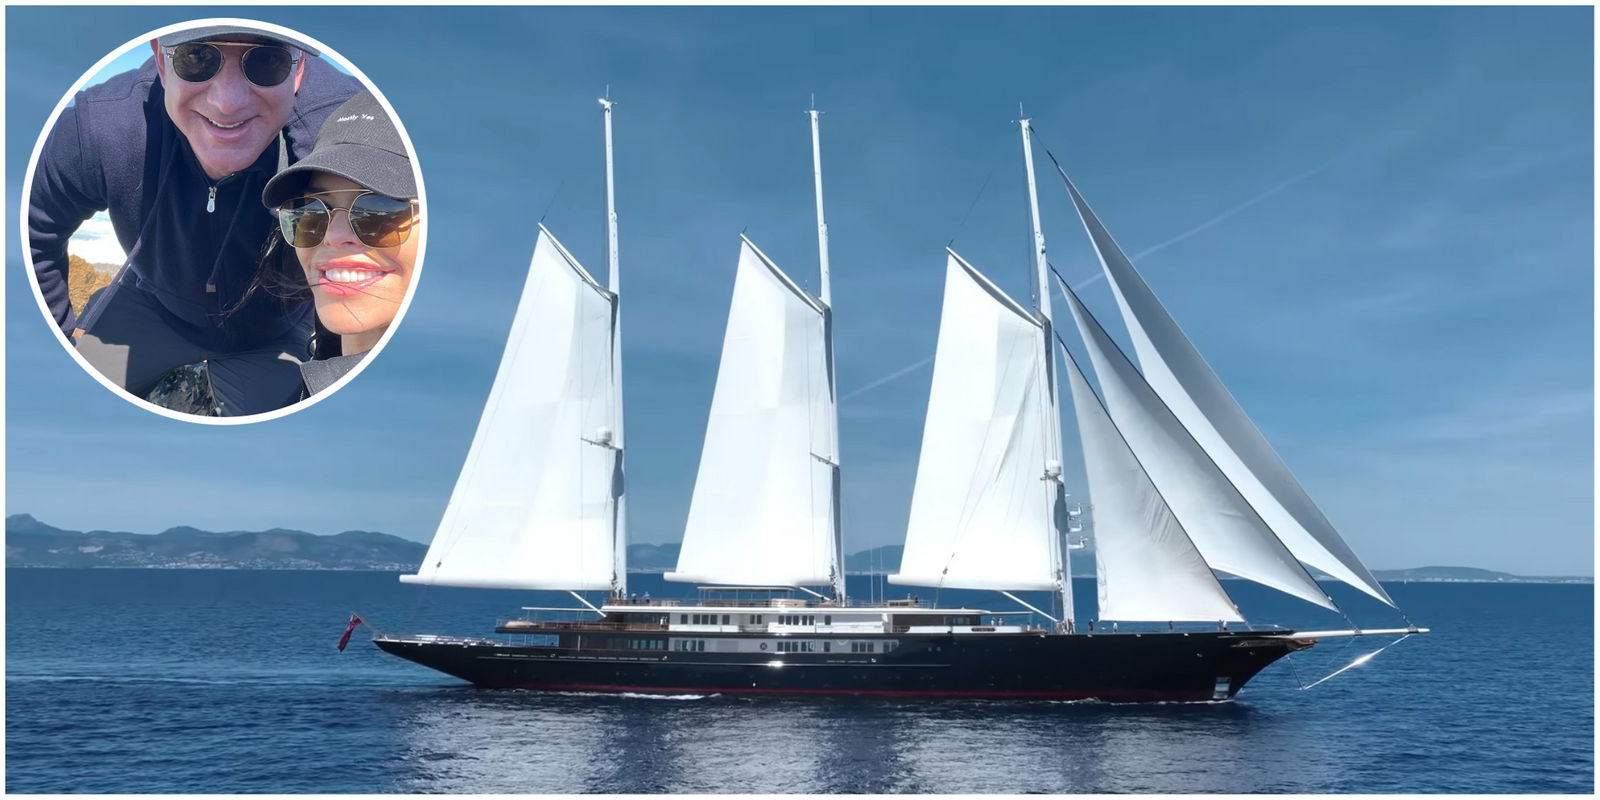 Jeff Bezos' $500 million sailing yacht Koru is spotted for the first time  cruising under sail and it's a sight to behold. So massive is the vessel  that the crew on the